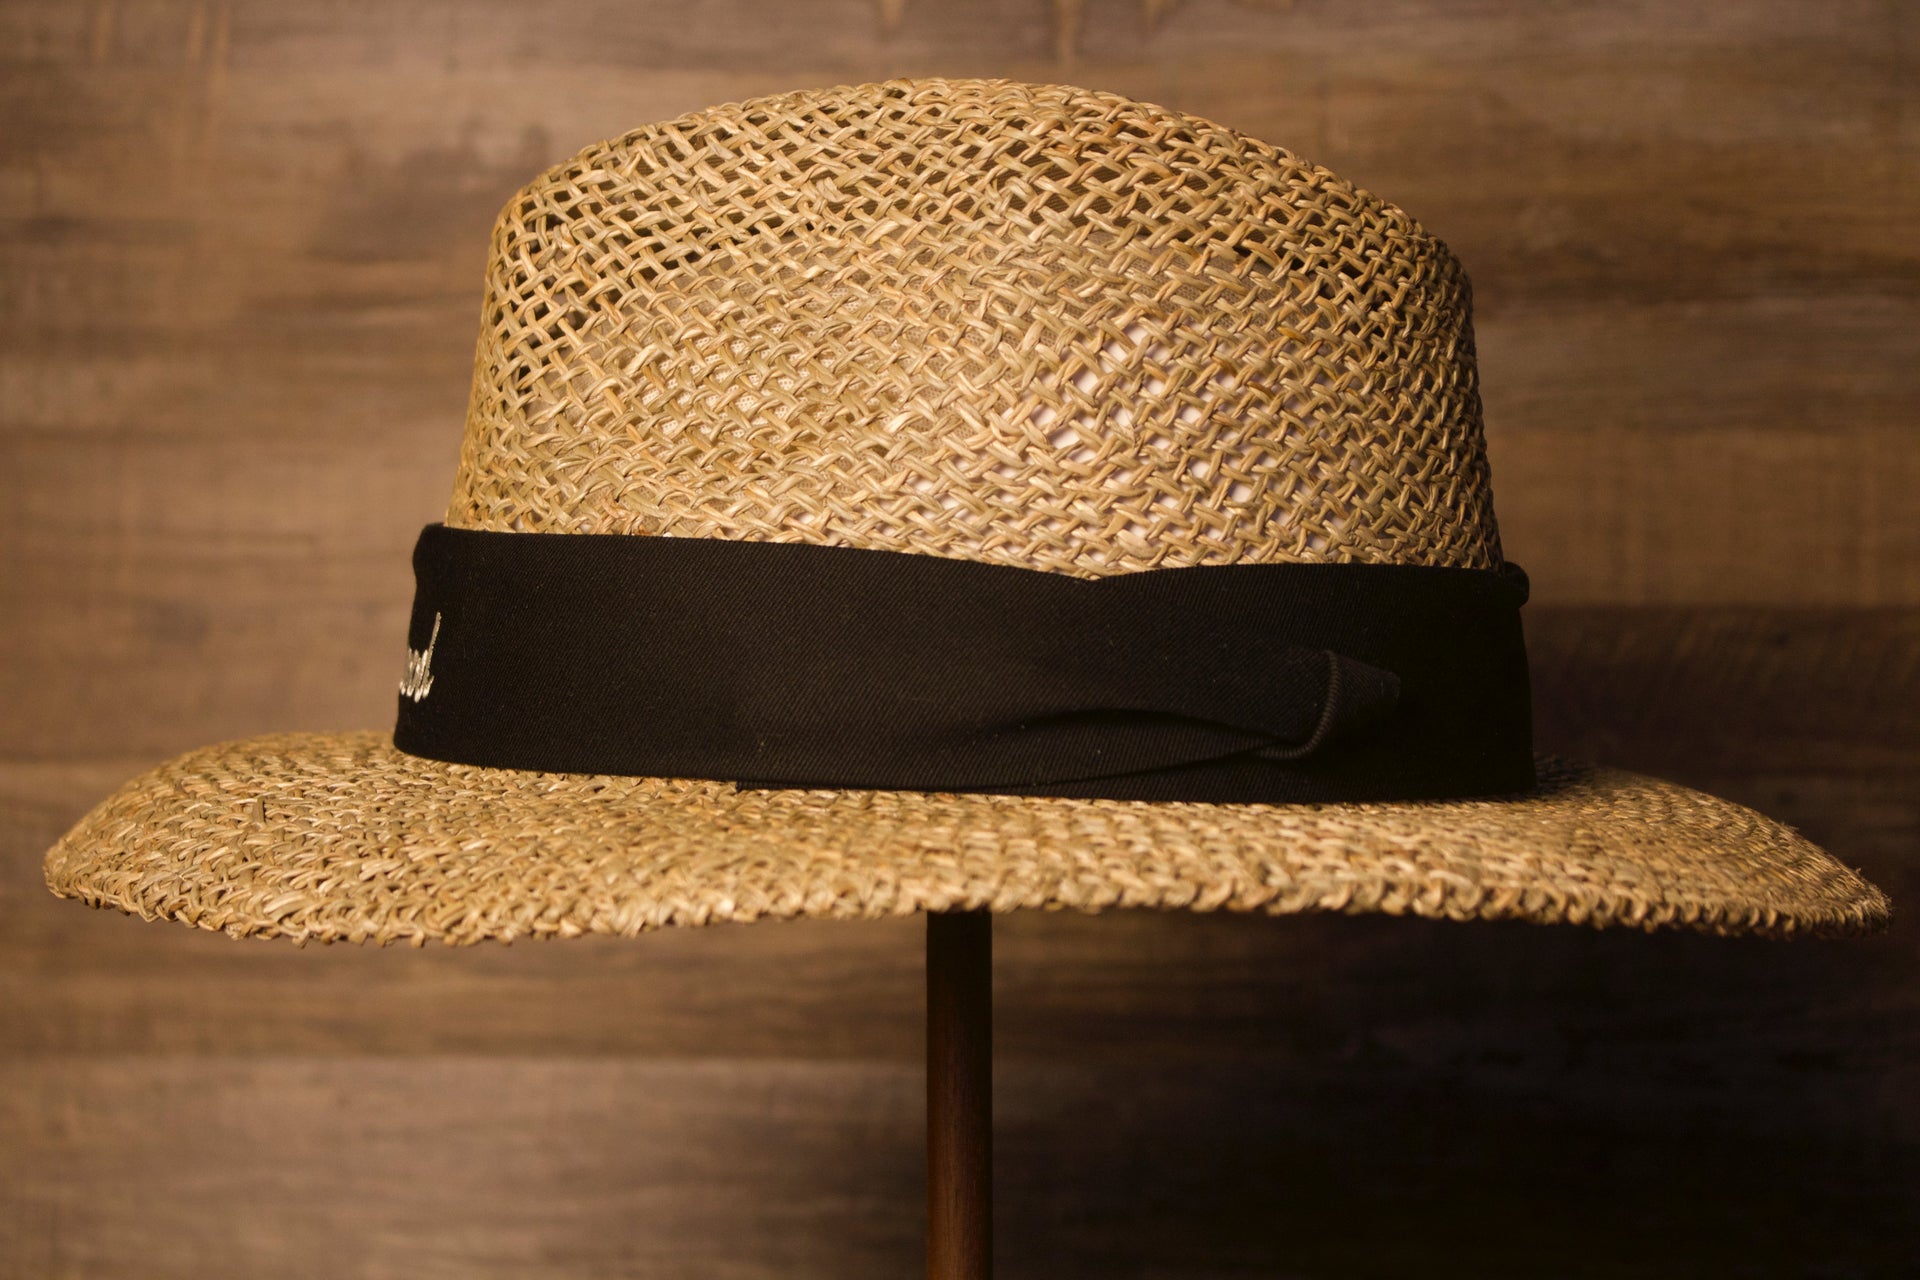 Wildwood Hat | Wildwood New Jersey Stone Colored Straw Hat |  OSFM the left side has a blank black band as well 